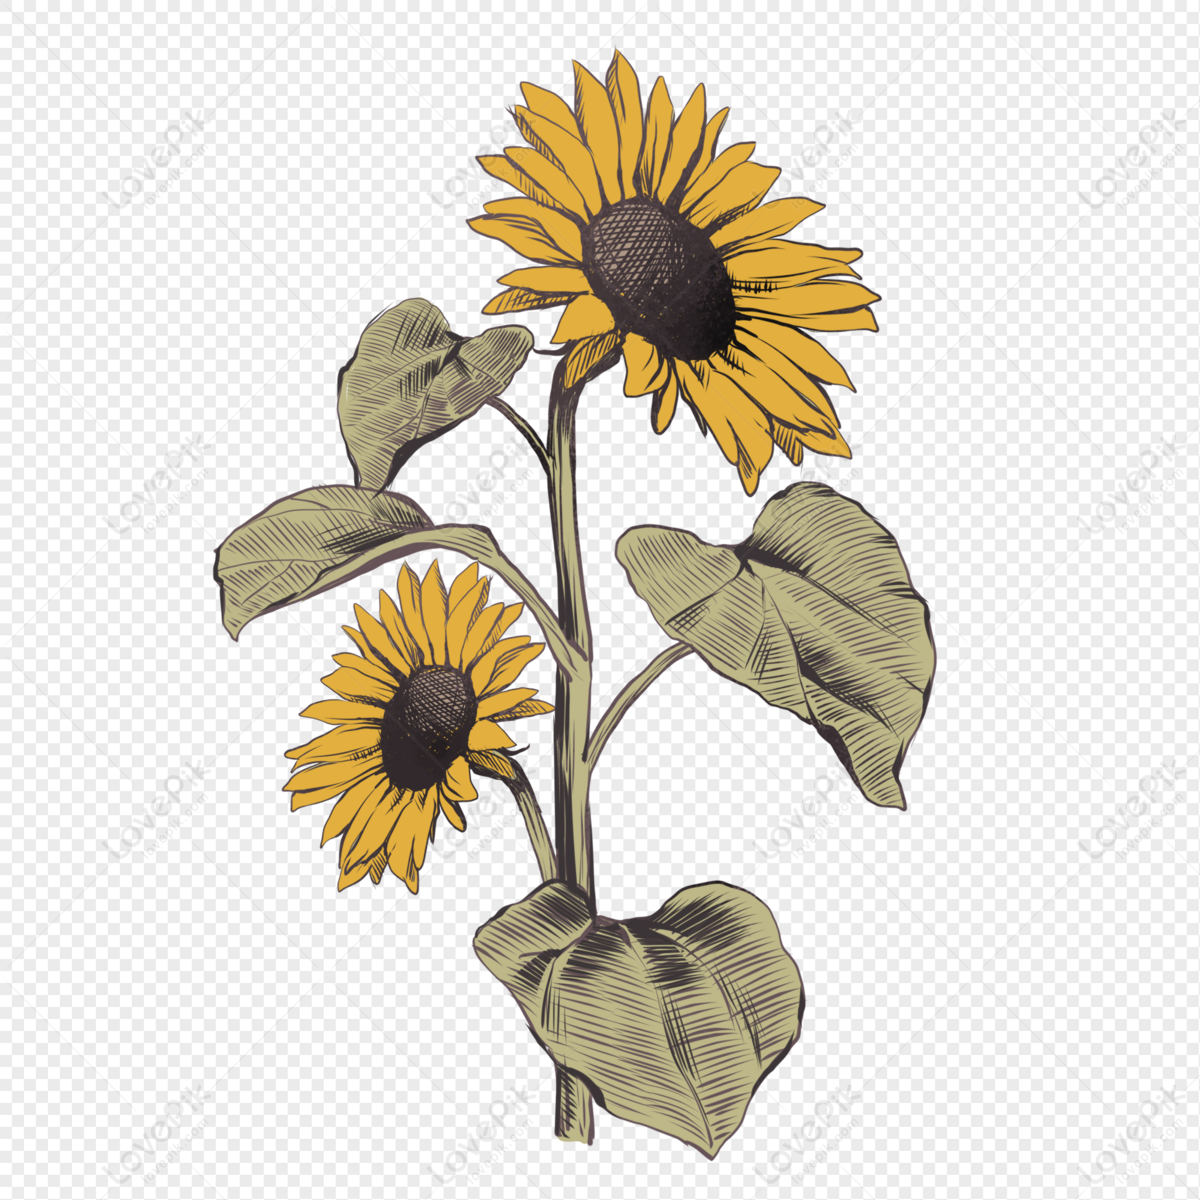 Sunflower hand drawing for design Royalty Free Vector Image